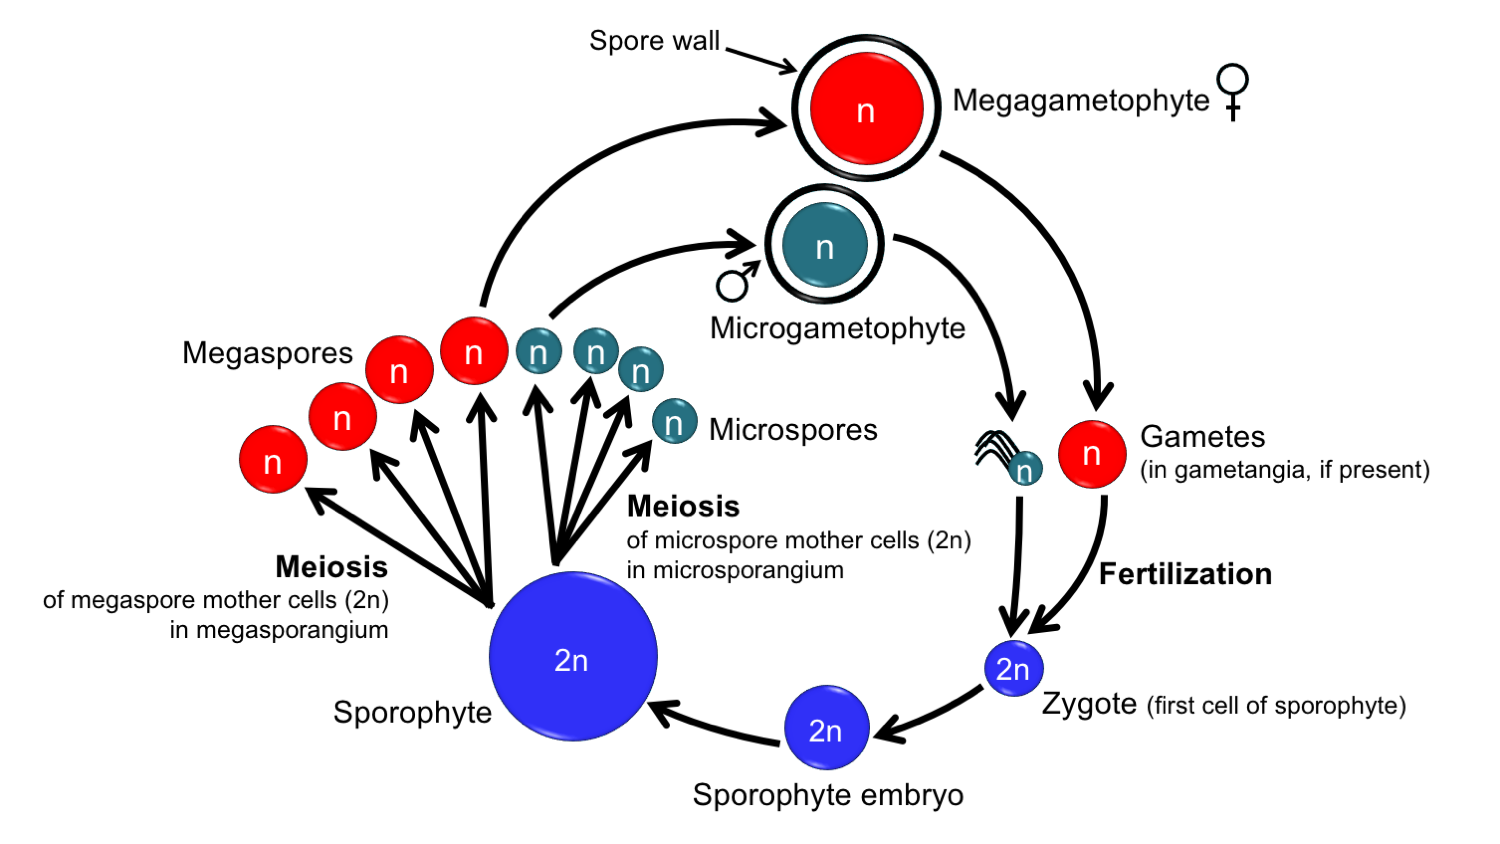 Diagram showing the generalized life cycle of a heterosporous plant.